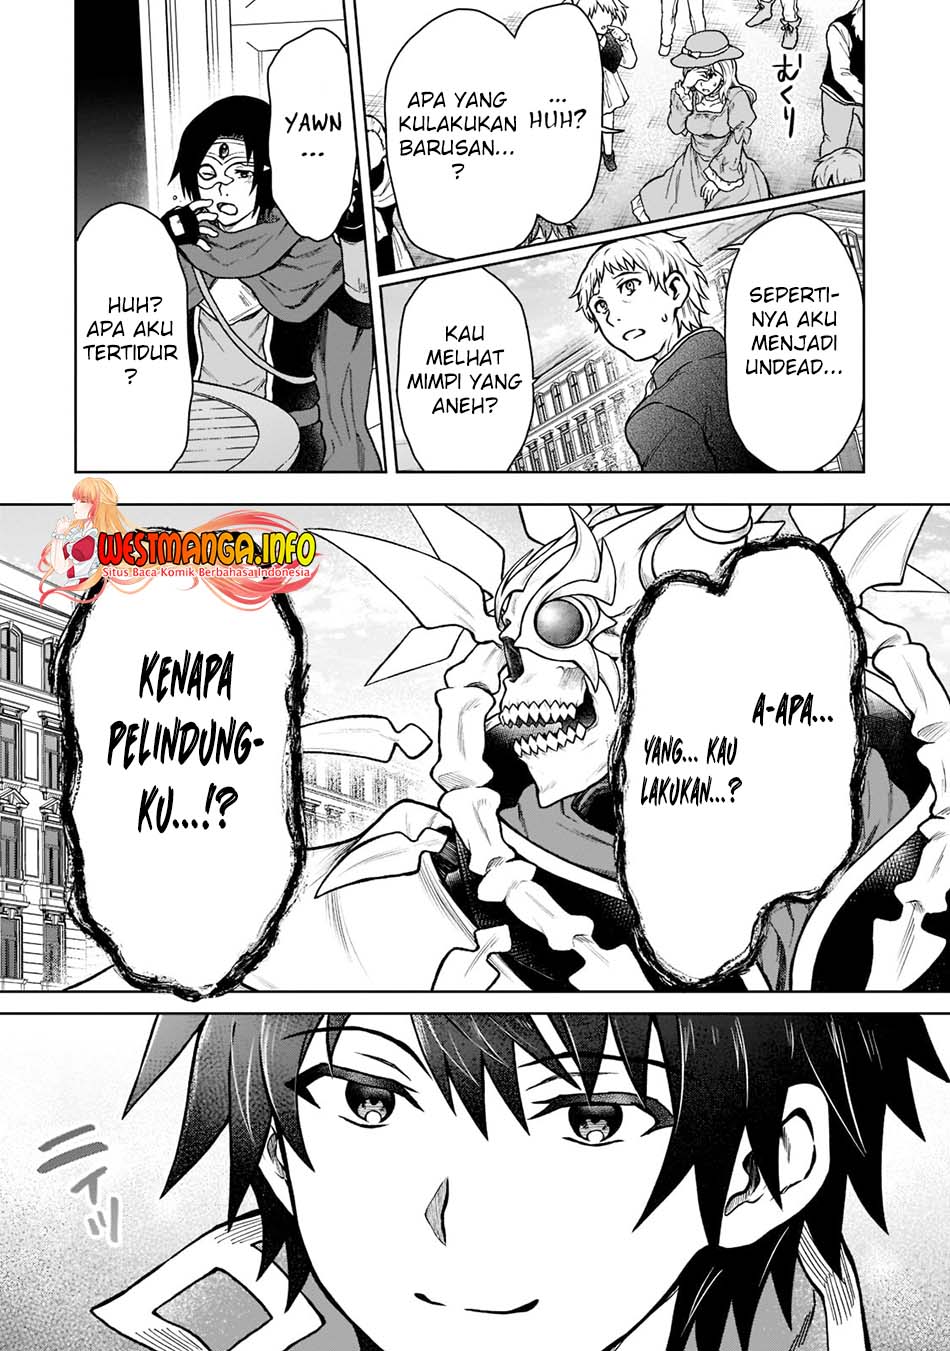 Dilarang COPAS - situs resmi www.mangacanblog.com - Komik d rank adventurer invited by a brave party and the stalking princess 011 - chapter 11 12 Indonesia d rank adventurer invited by a brave party and the stalking princess 011 - chapter 11 Terbaru 17|Baca Manga Komik Indonesia|Mangacan